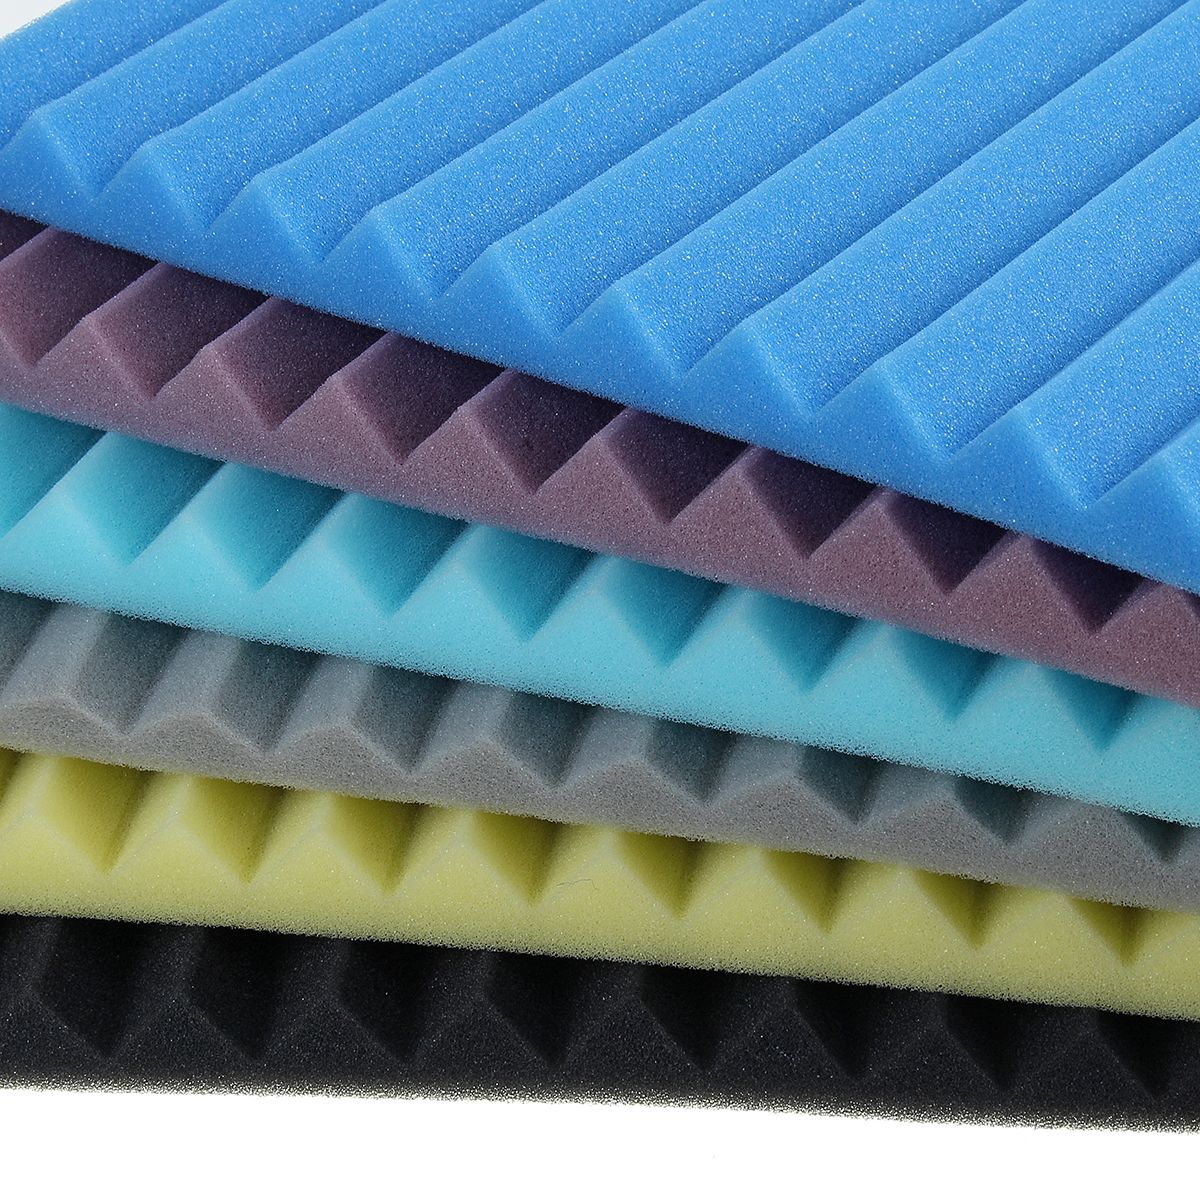 18-Pcs-Soundproofing-Wedges-Acoustic-Panels-Tiles-Insulation-Closed-Cell-Foams-1737777